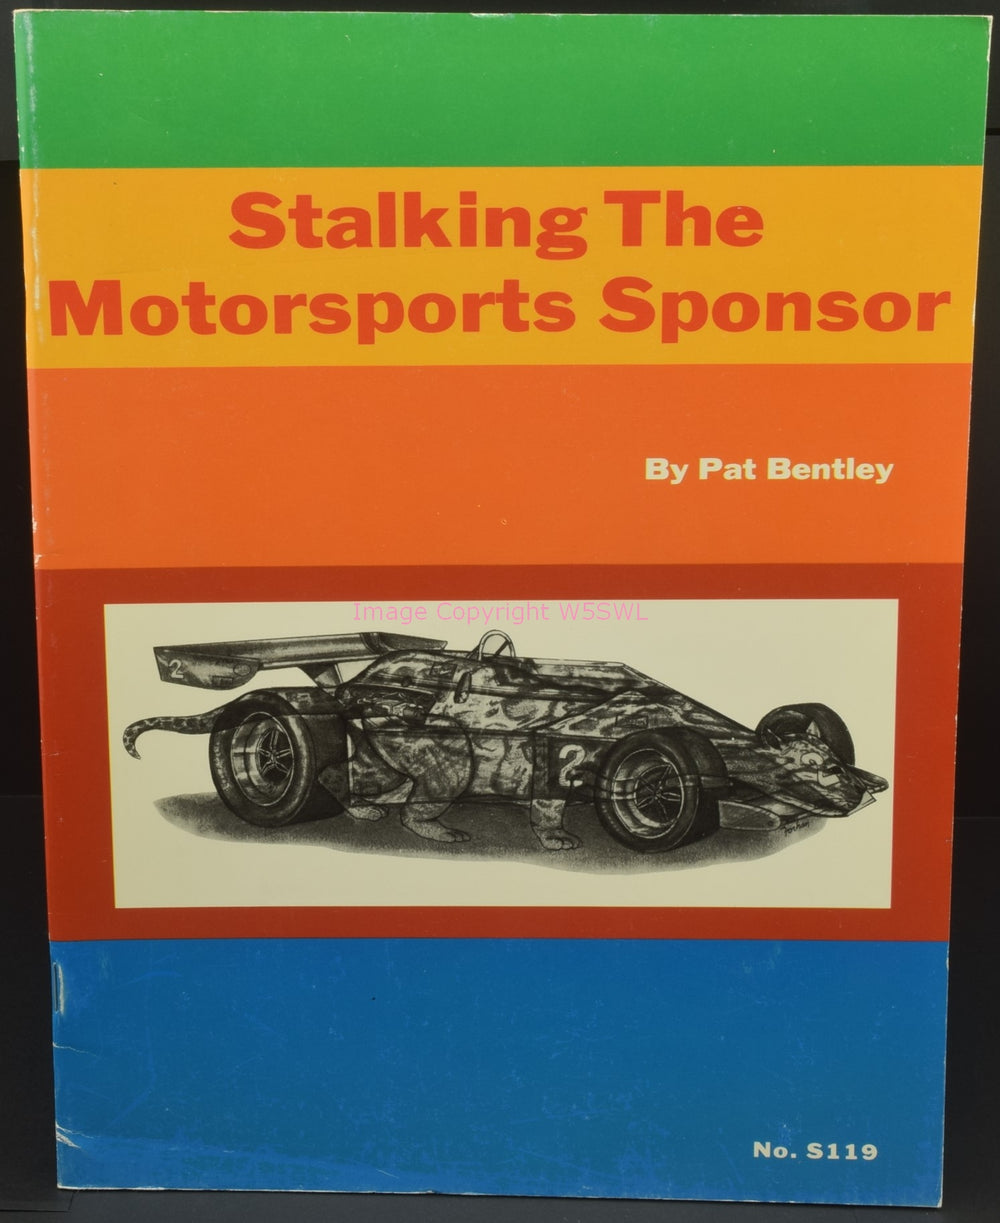 Stalking The Motorsports Sponsor No. S119 Pat Bentley - Dave's Hobby Shop by W5SWL